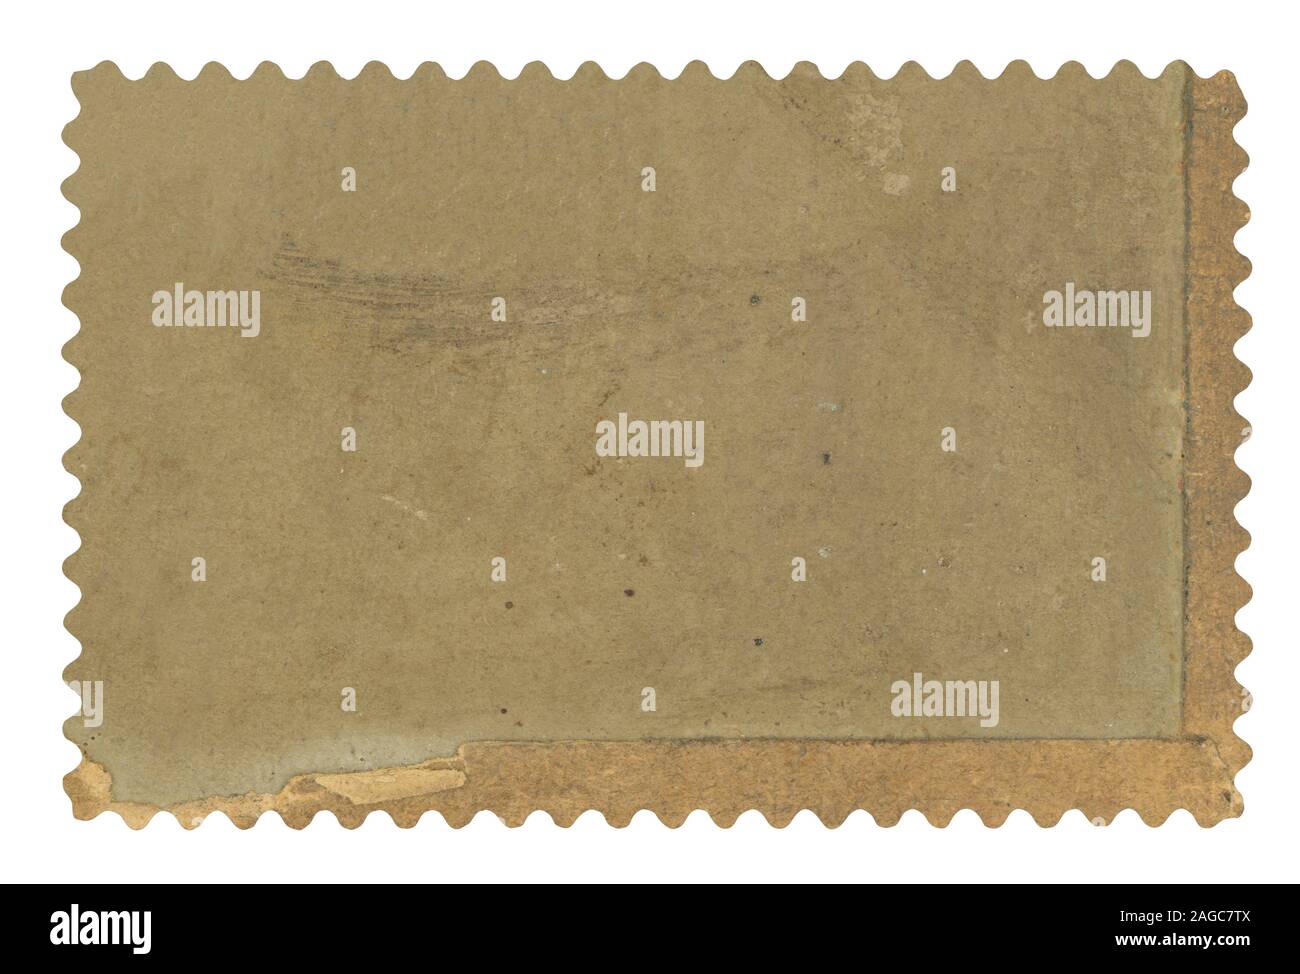 Blank postage stamp - Isolated on White (Clipping path included) Stock Photo